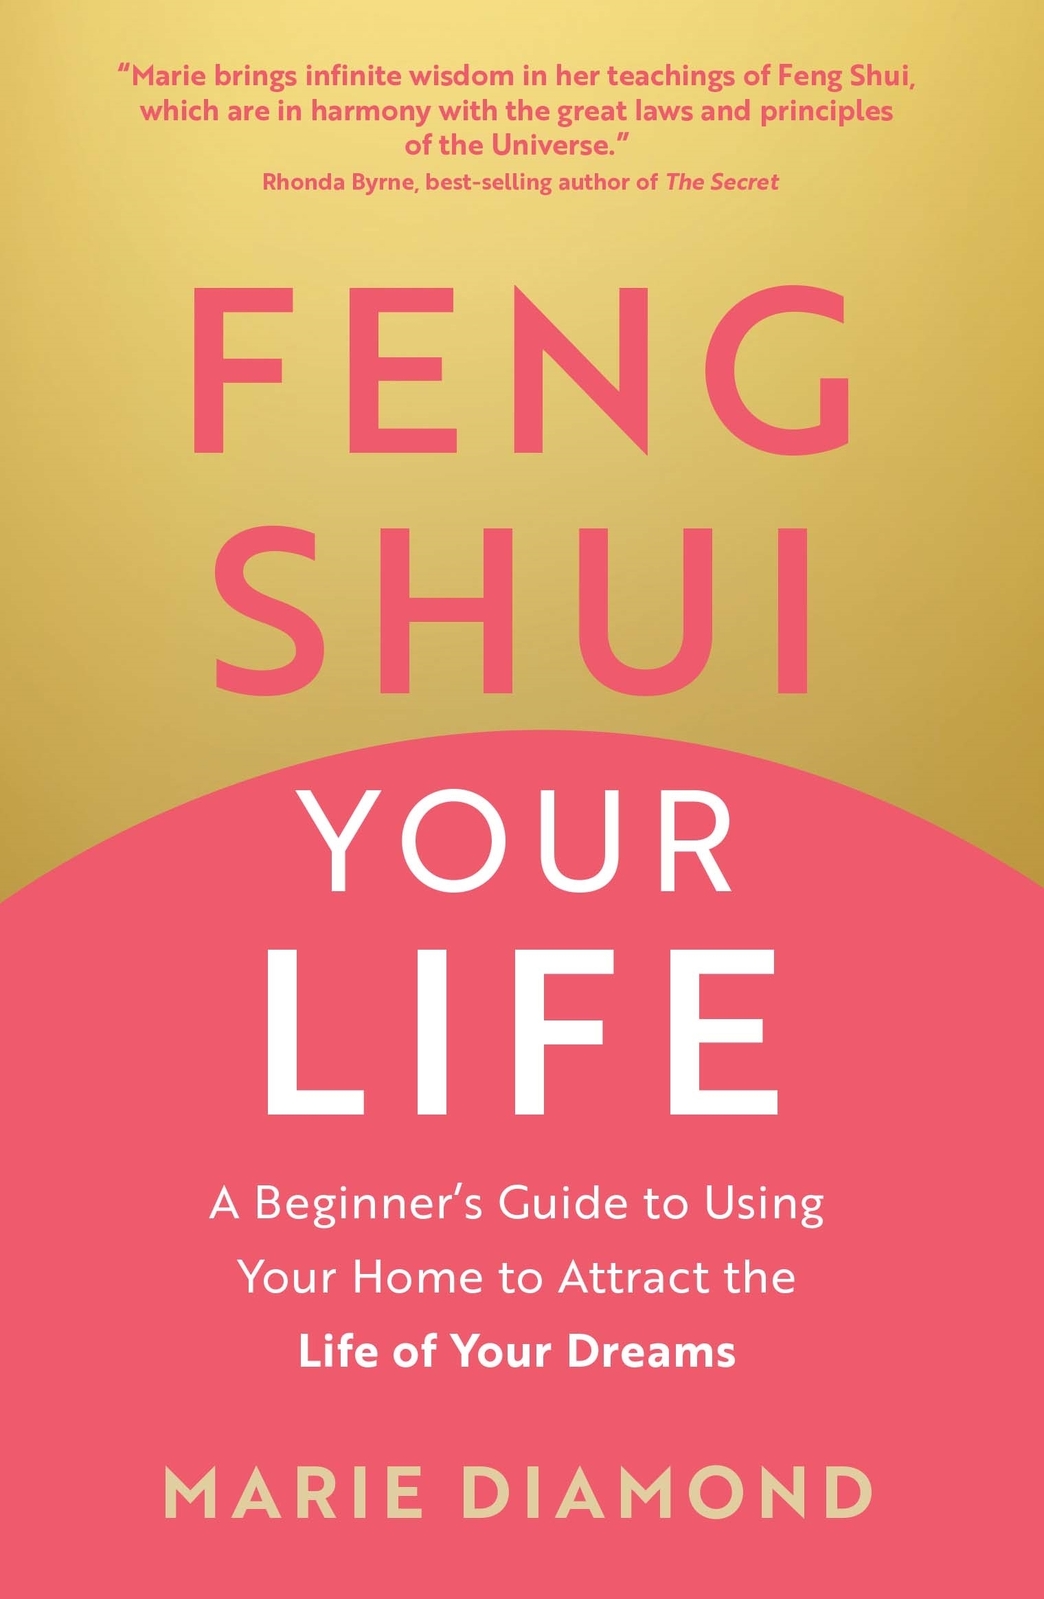 Feng Shui Principles and Tips for Beginners